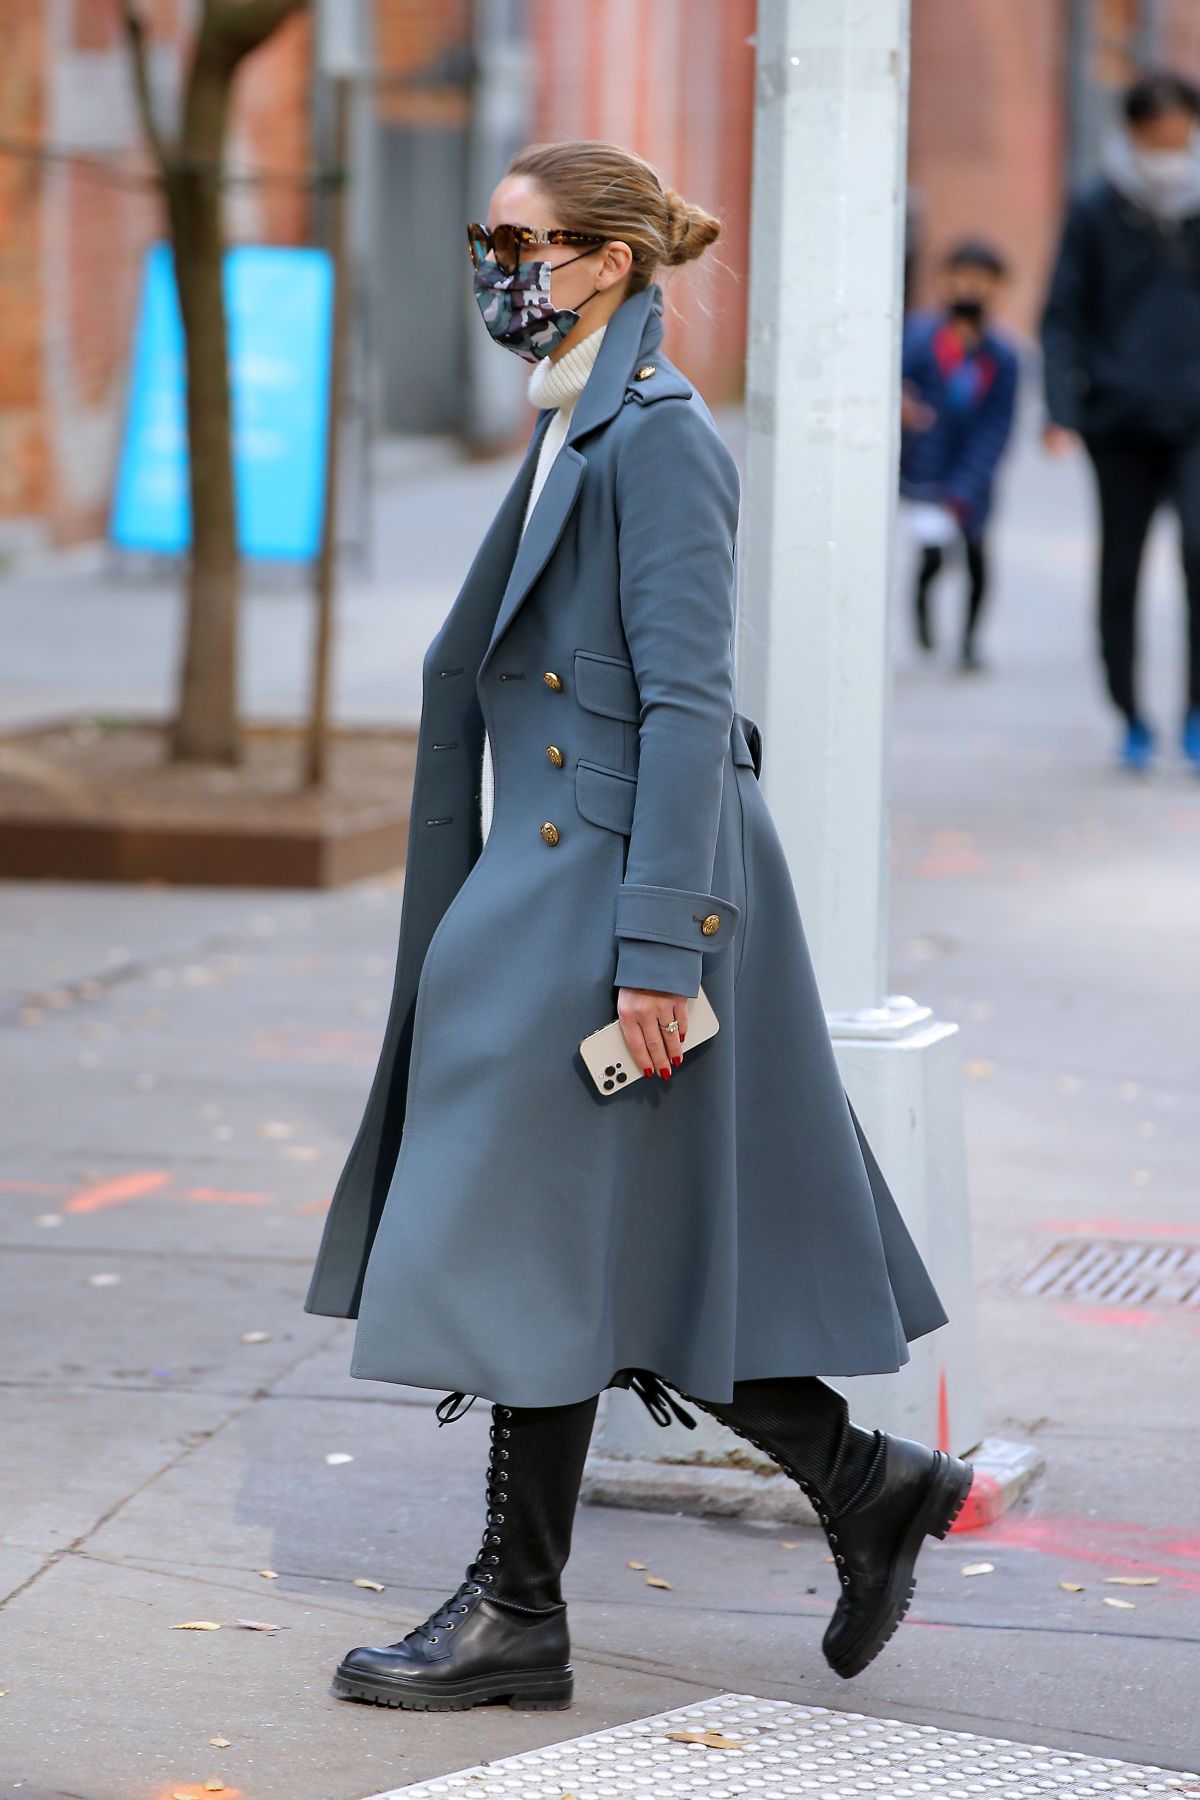 olivia-palermo-wearing-a-mask-out-in-new-york-12-13-2020-0.jpg